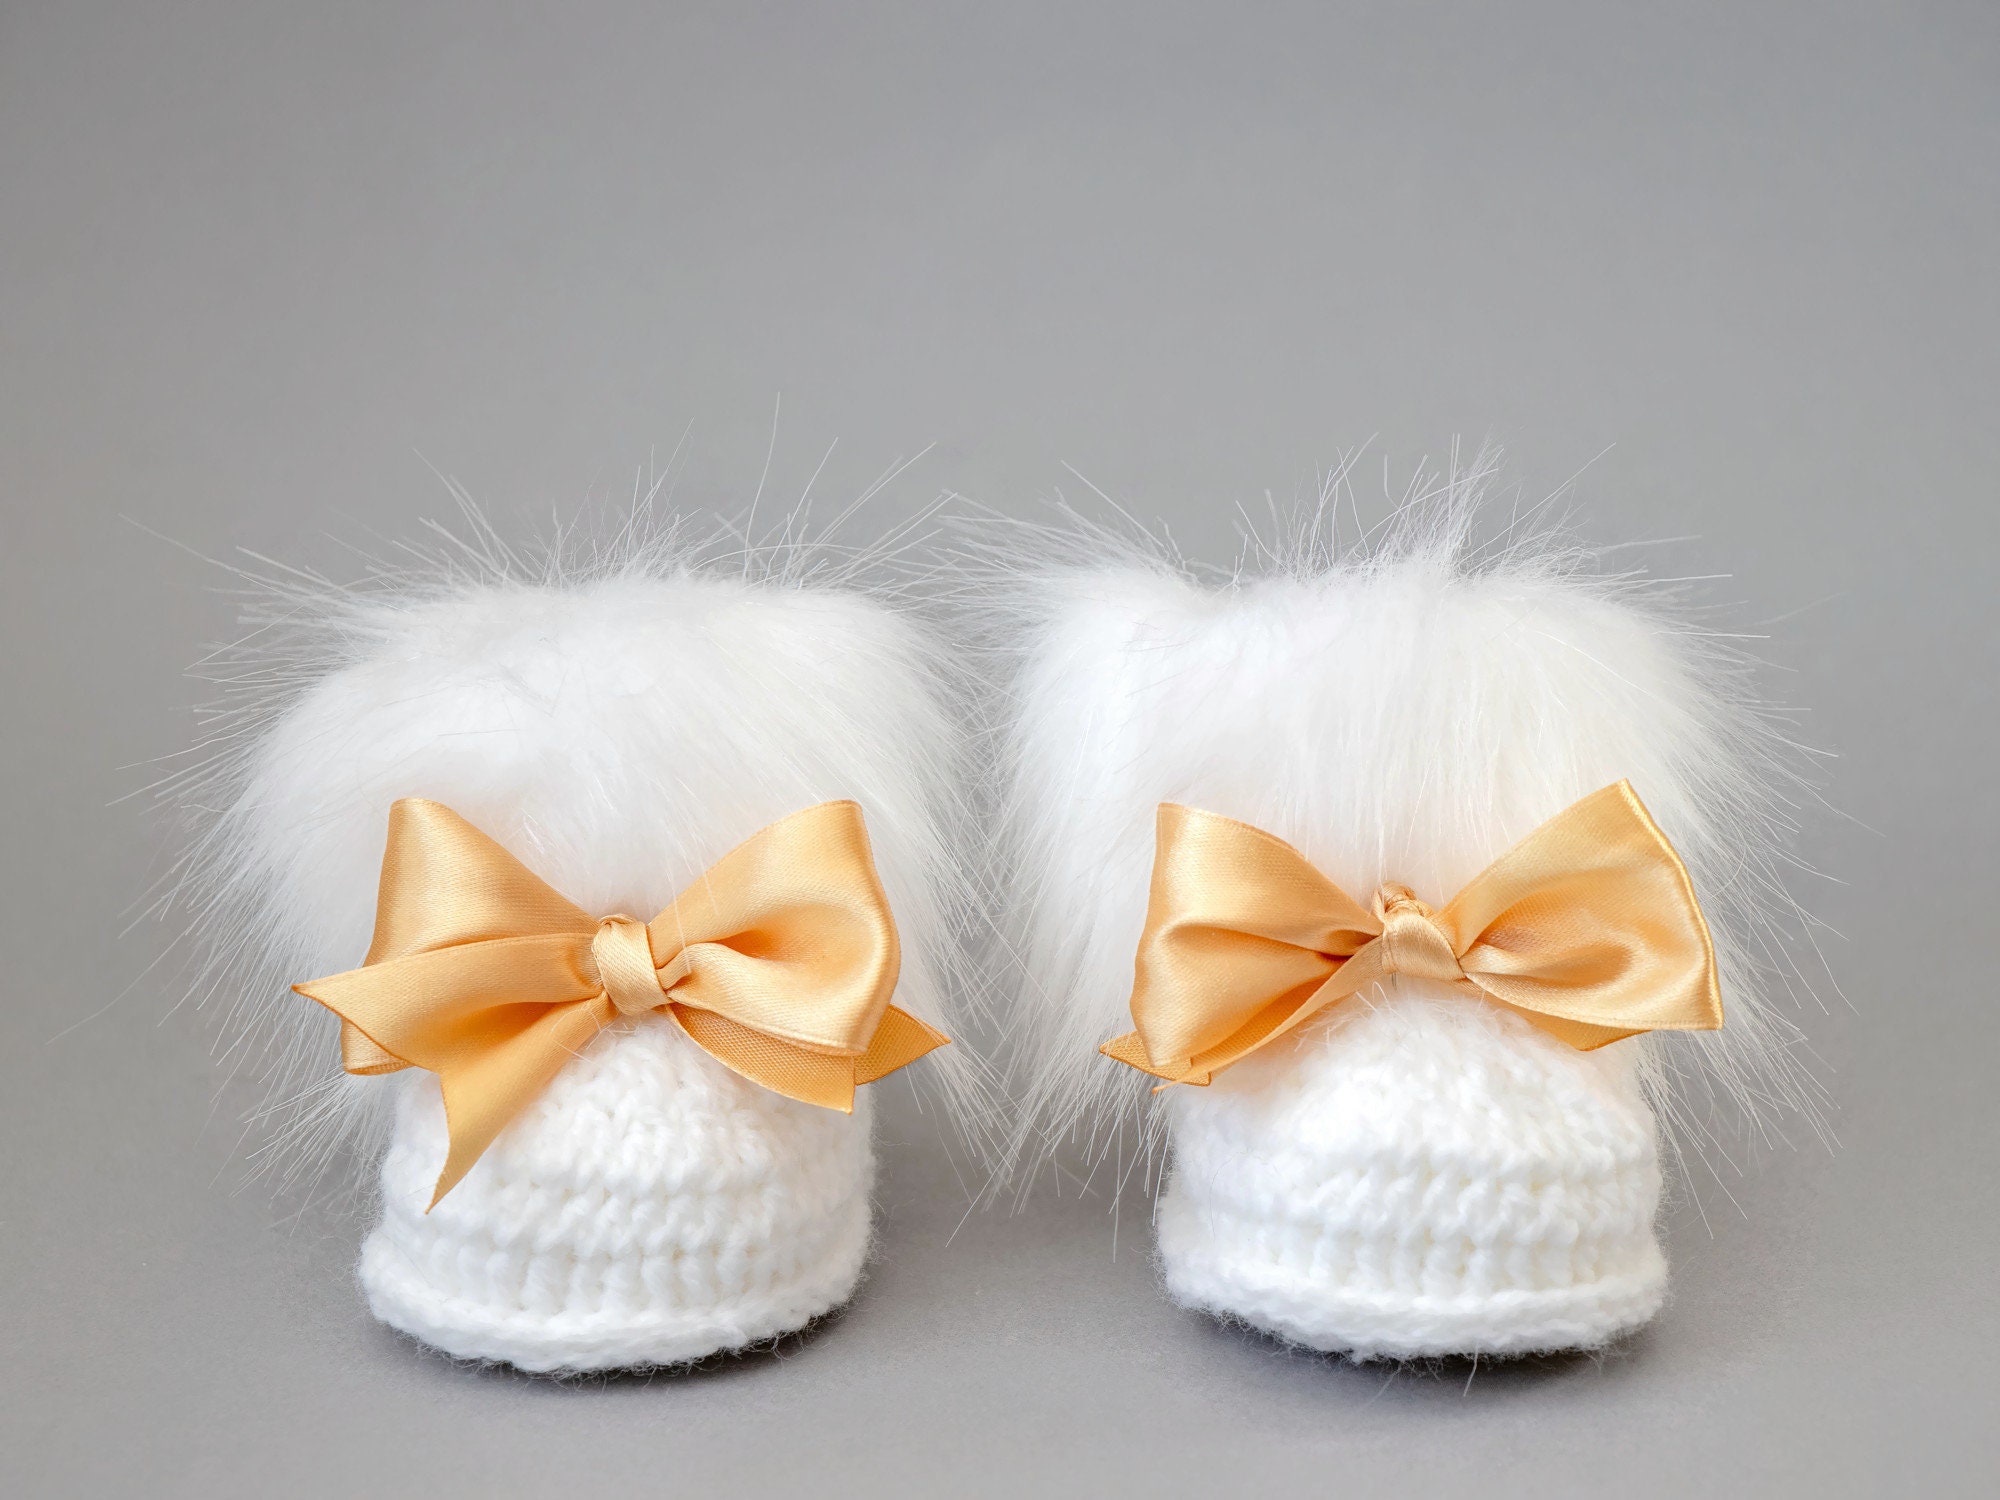 Elegant Baby Silver Crocheted Shoes with White Pom Poms for Baby Girls